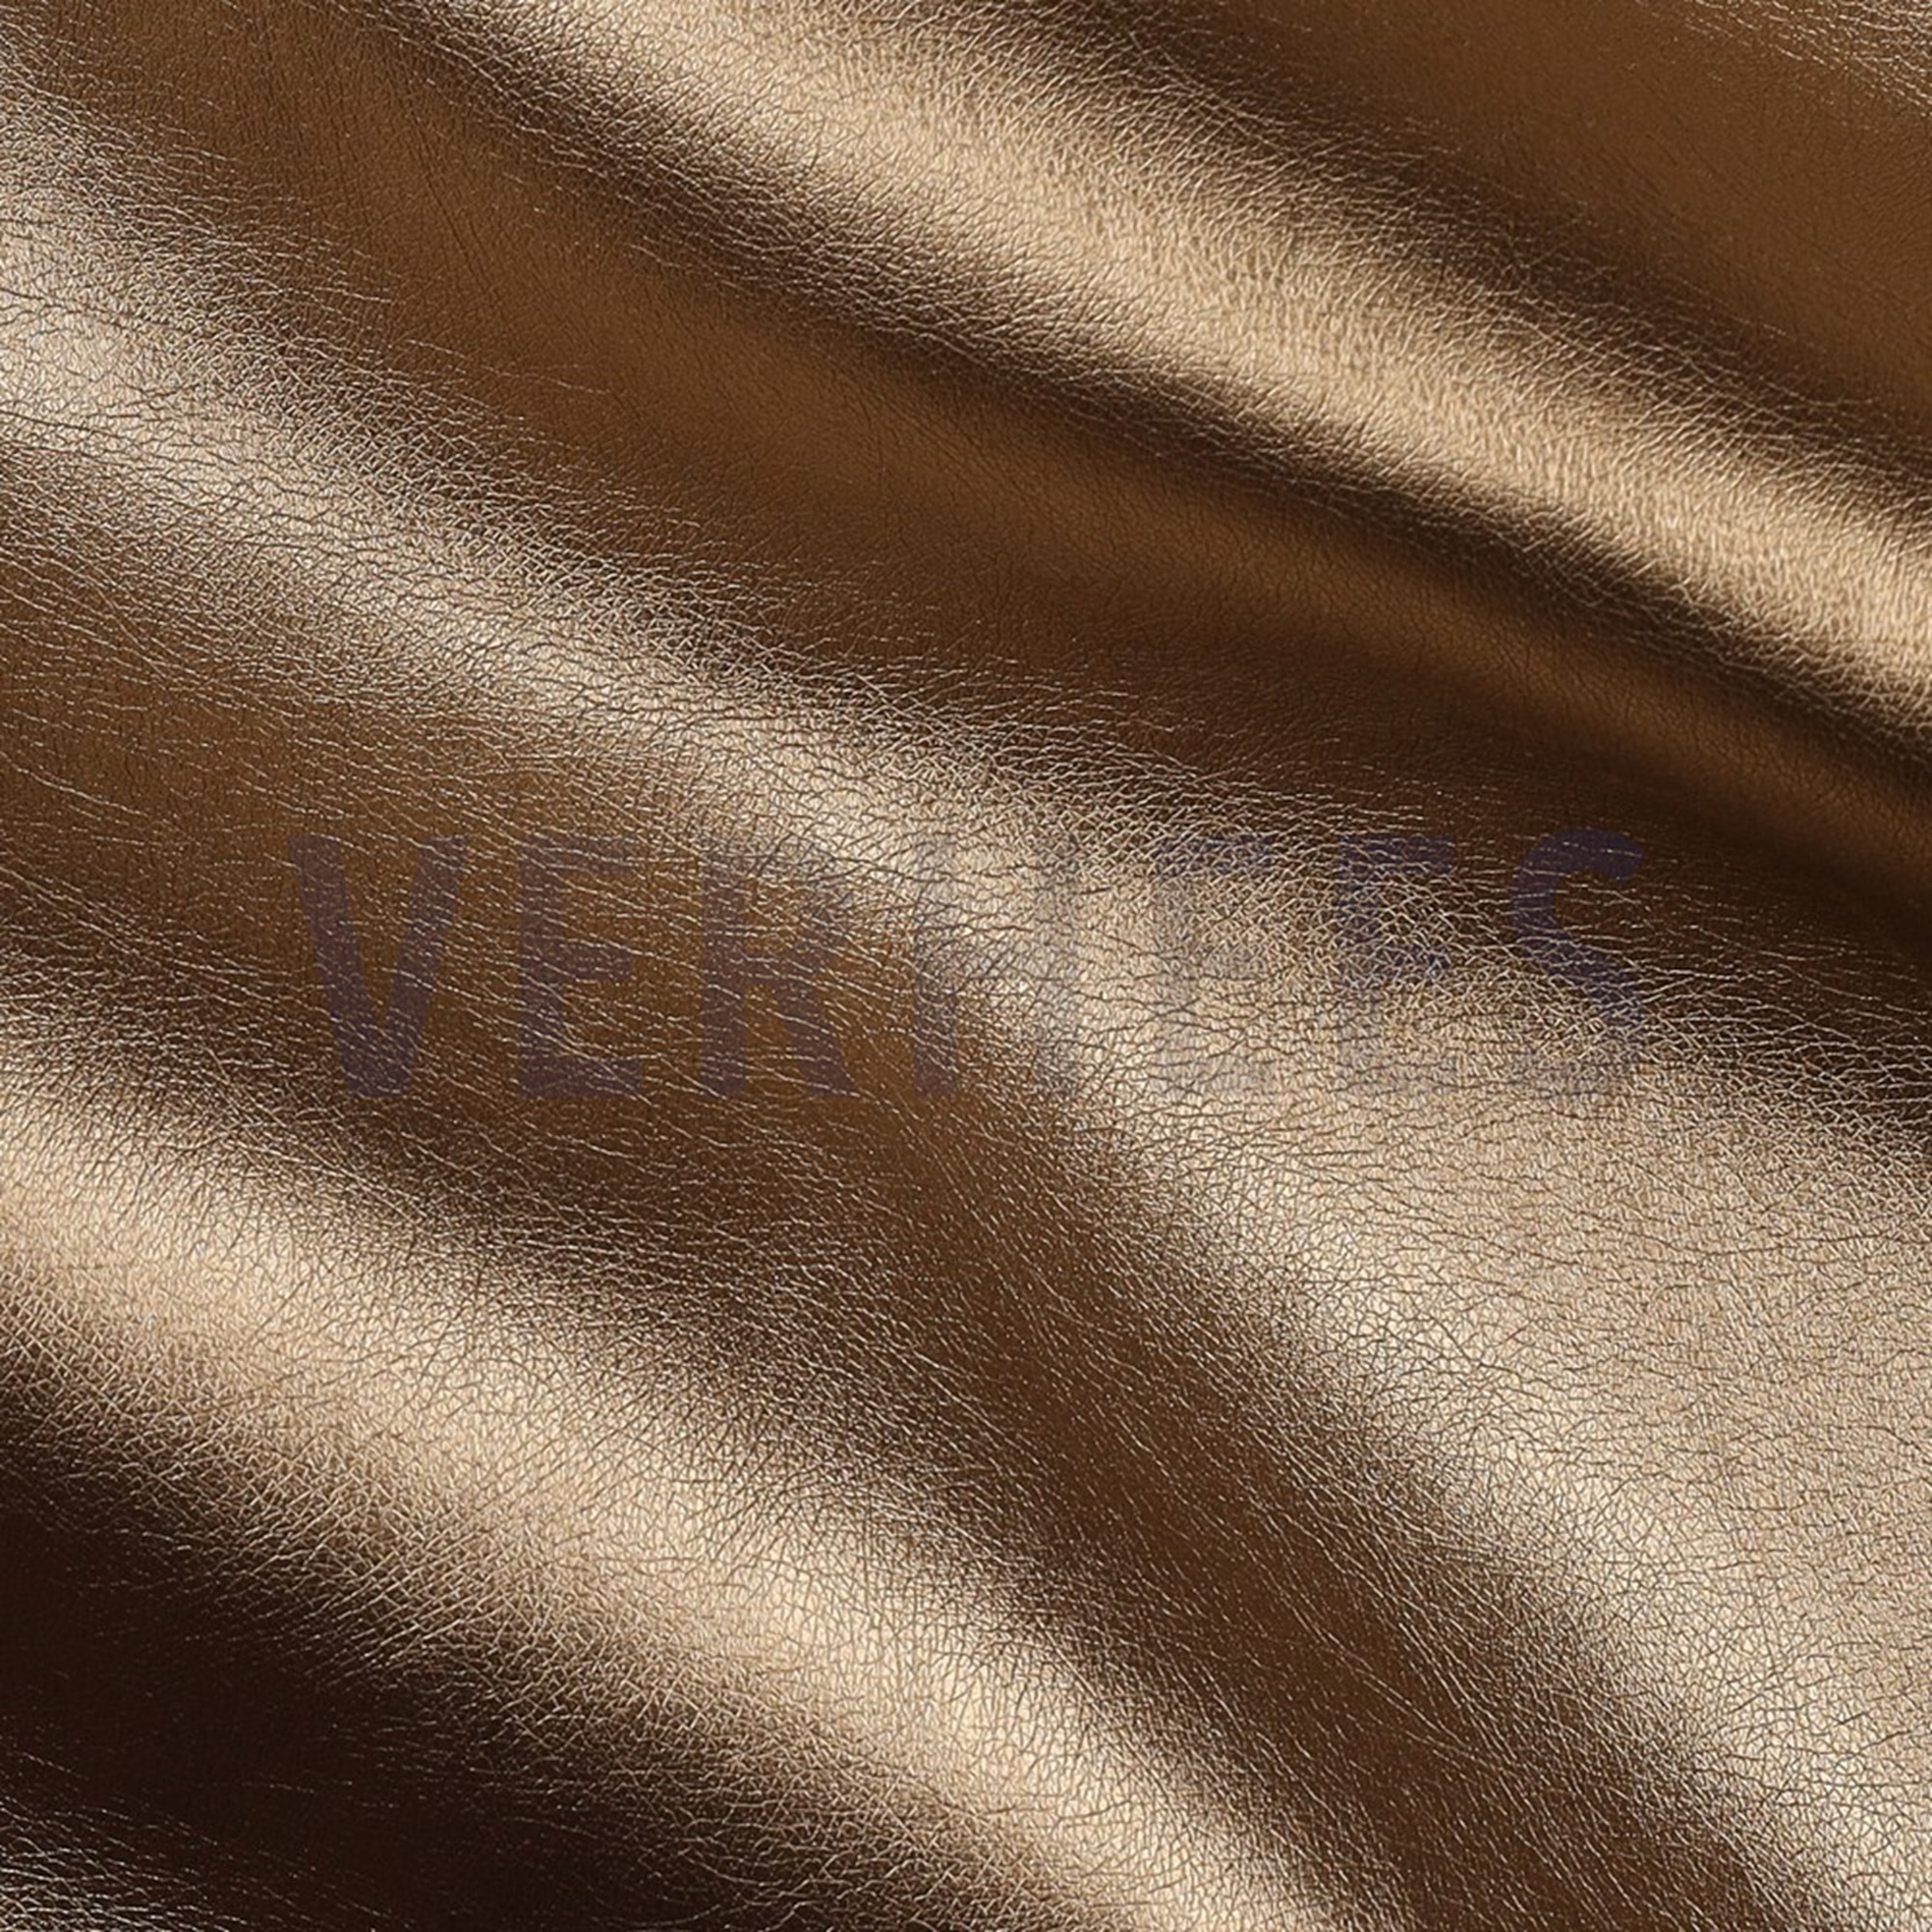 FAUX LEATHER COPPER METALLIC (high resolution) #2